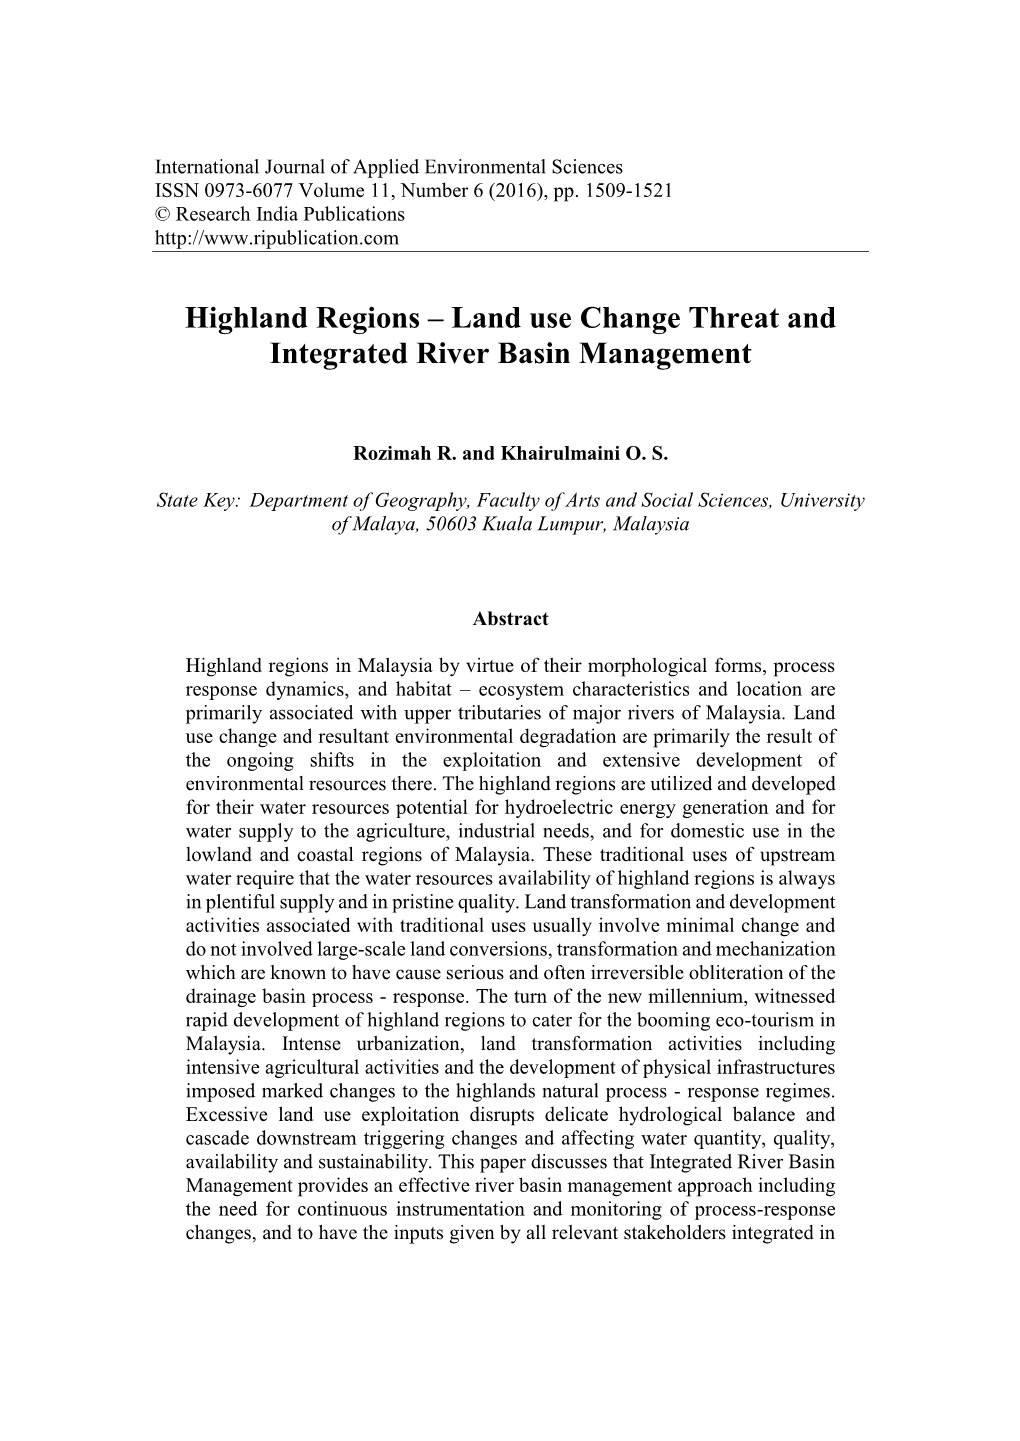 Highland Regions – Land Use Change Threat and Integrated River Basin Management